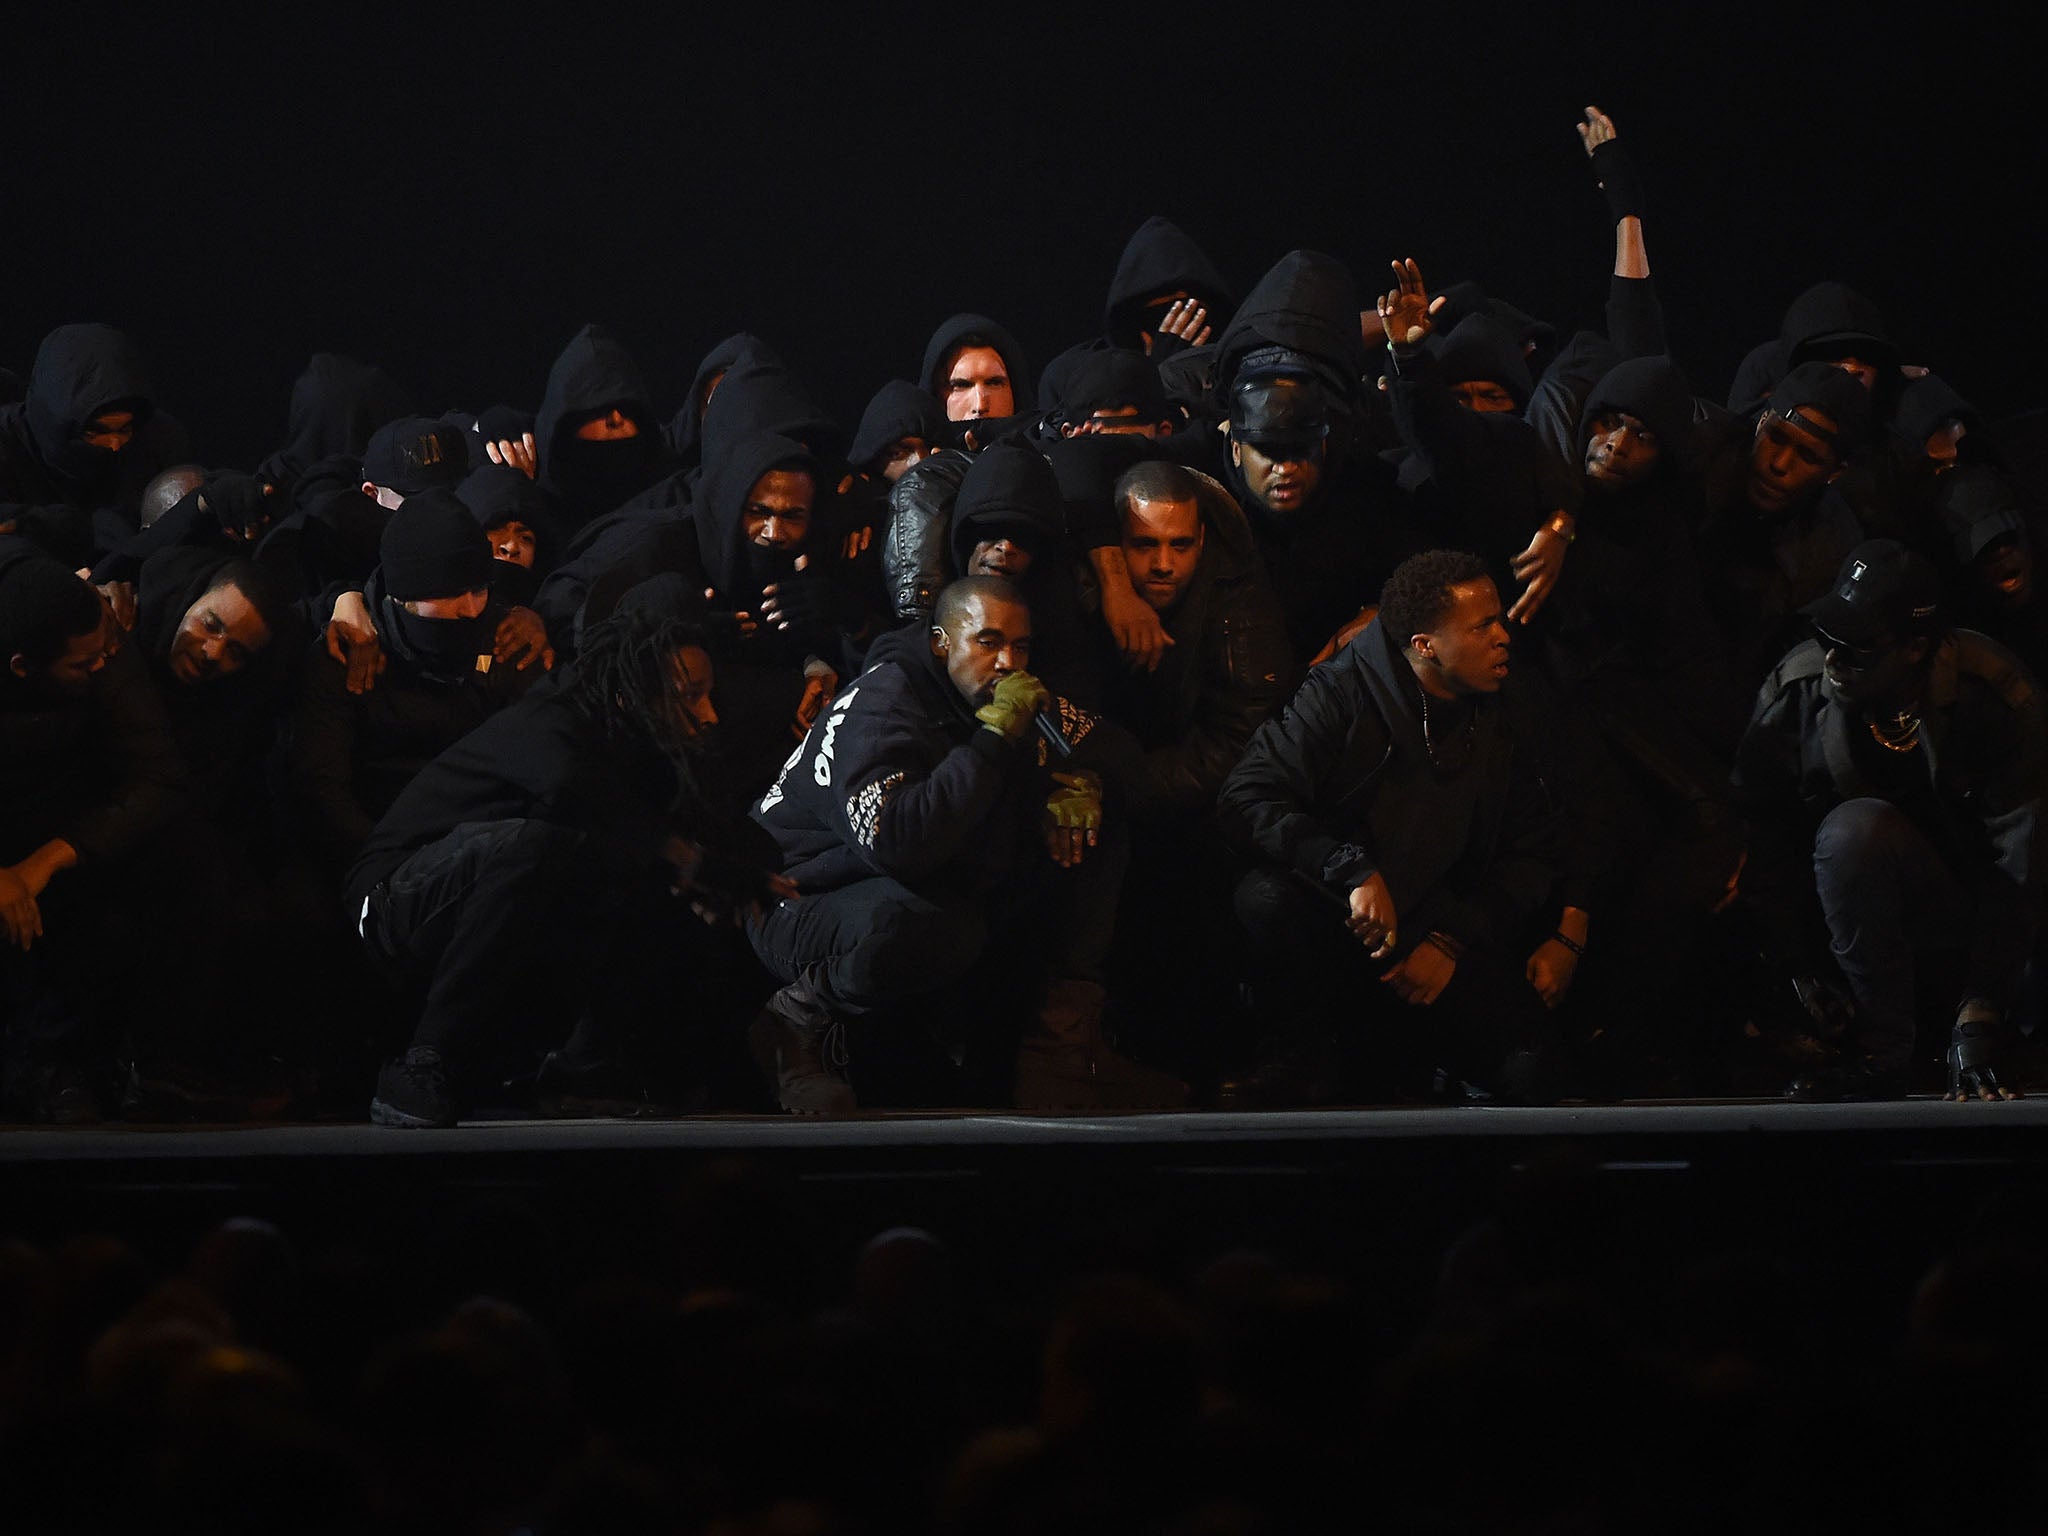 Kanye West performs live at the Brit Awards 2015